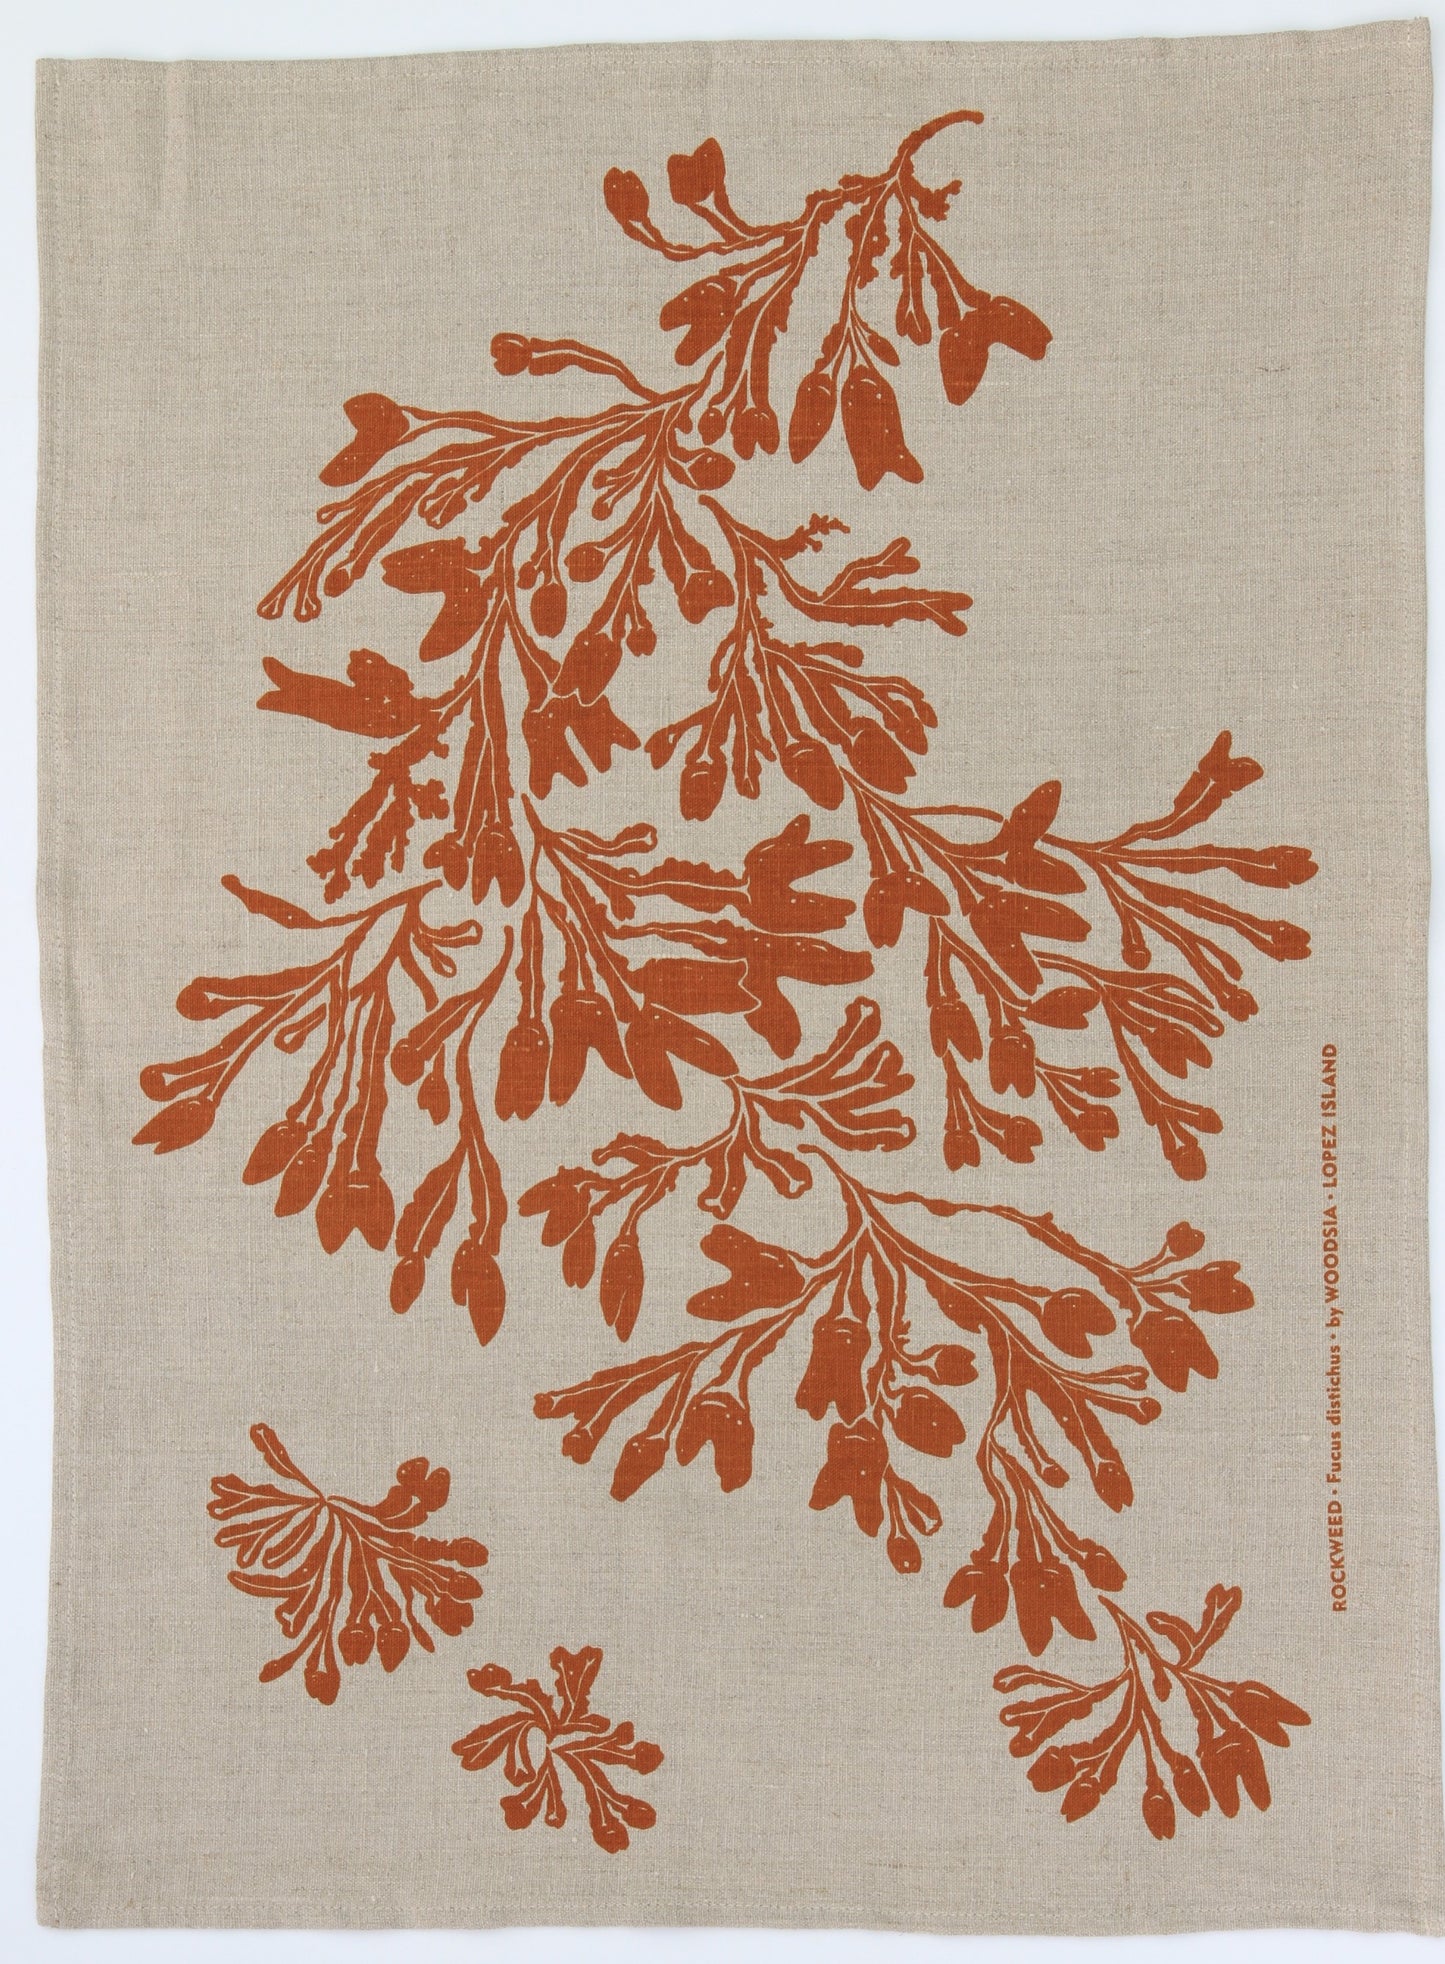 Seaweed Kitchen Towel in Ochre on Natural Linen